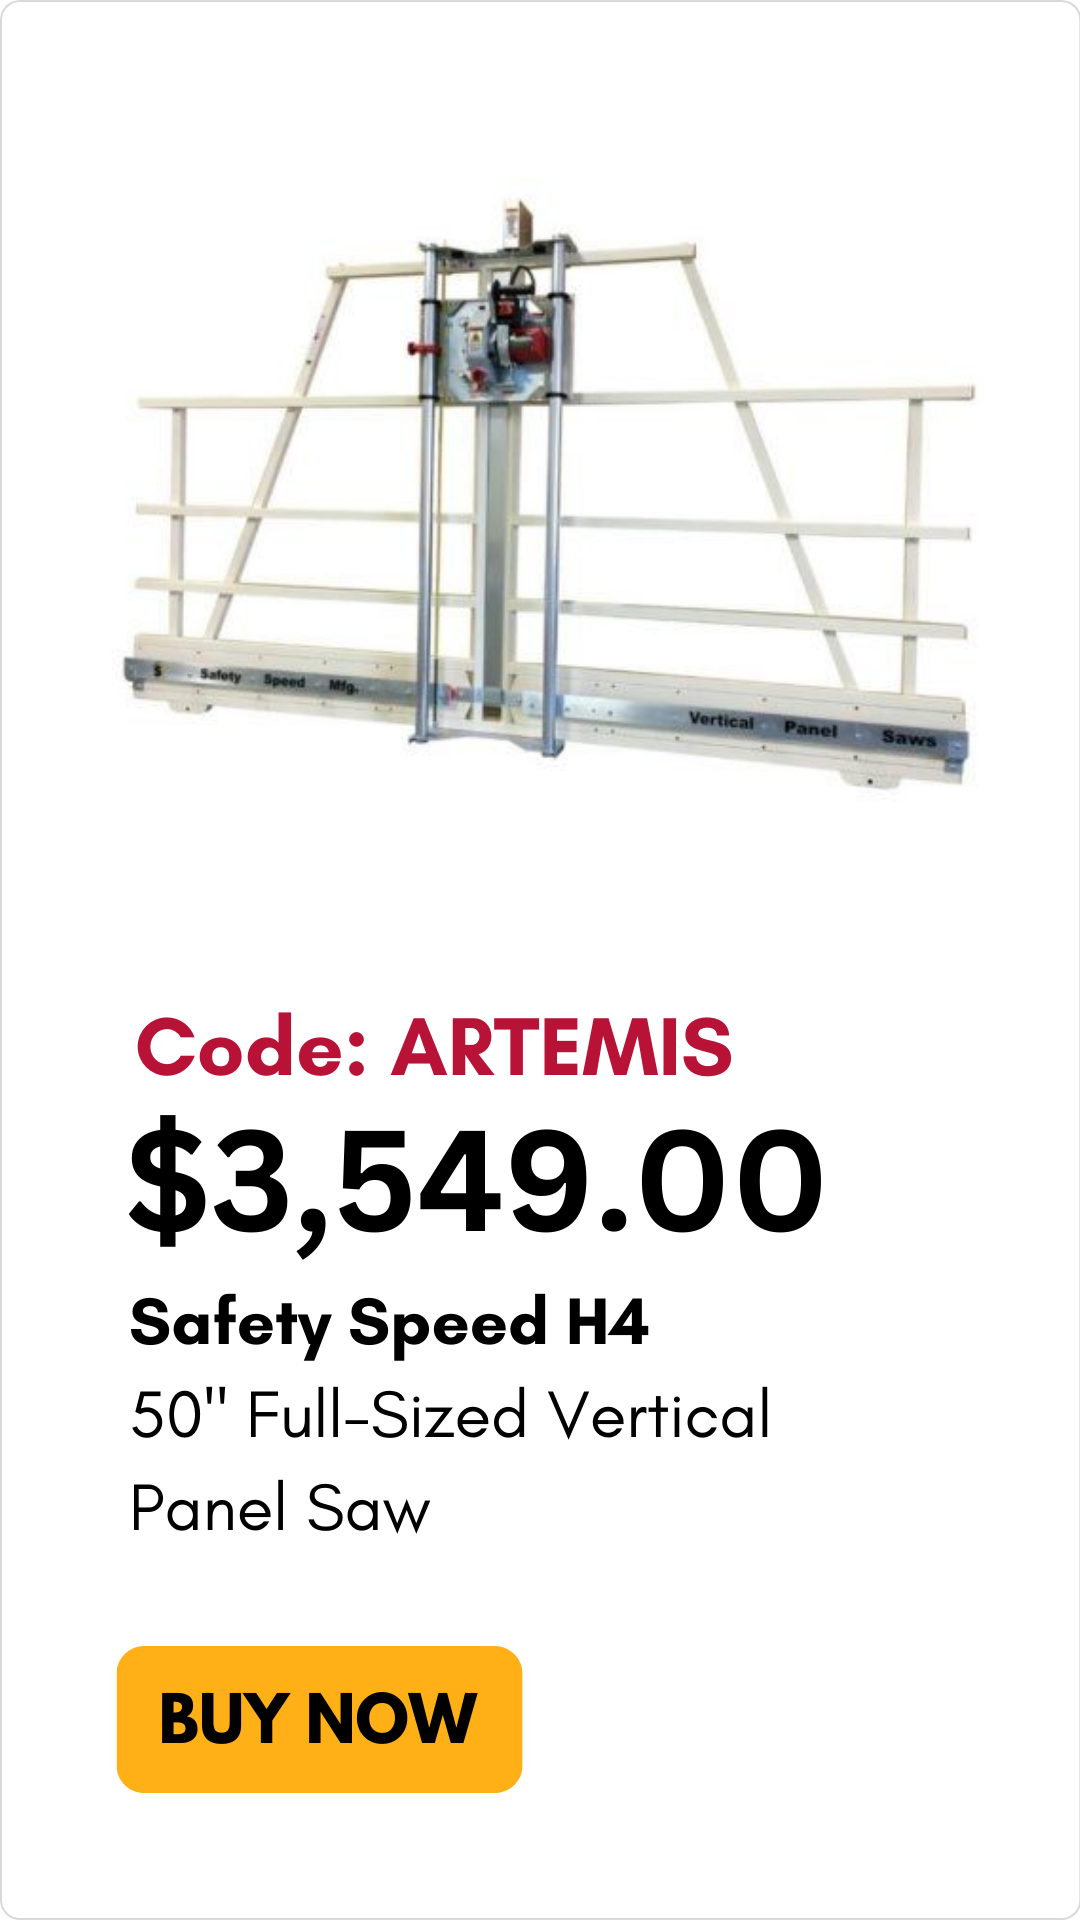 Safety Speed H4 Full-Size 50" Vertical Panel Saw with code ARTEMIS